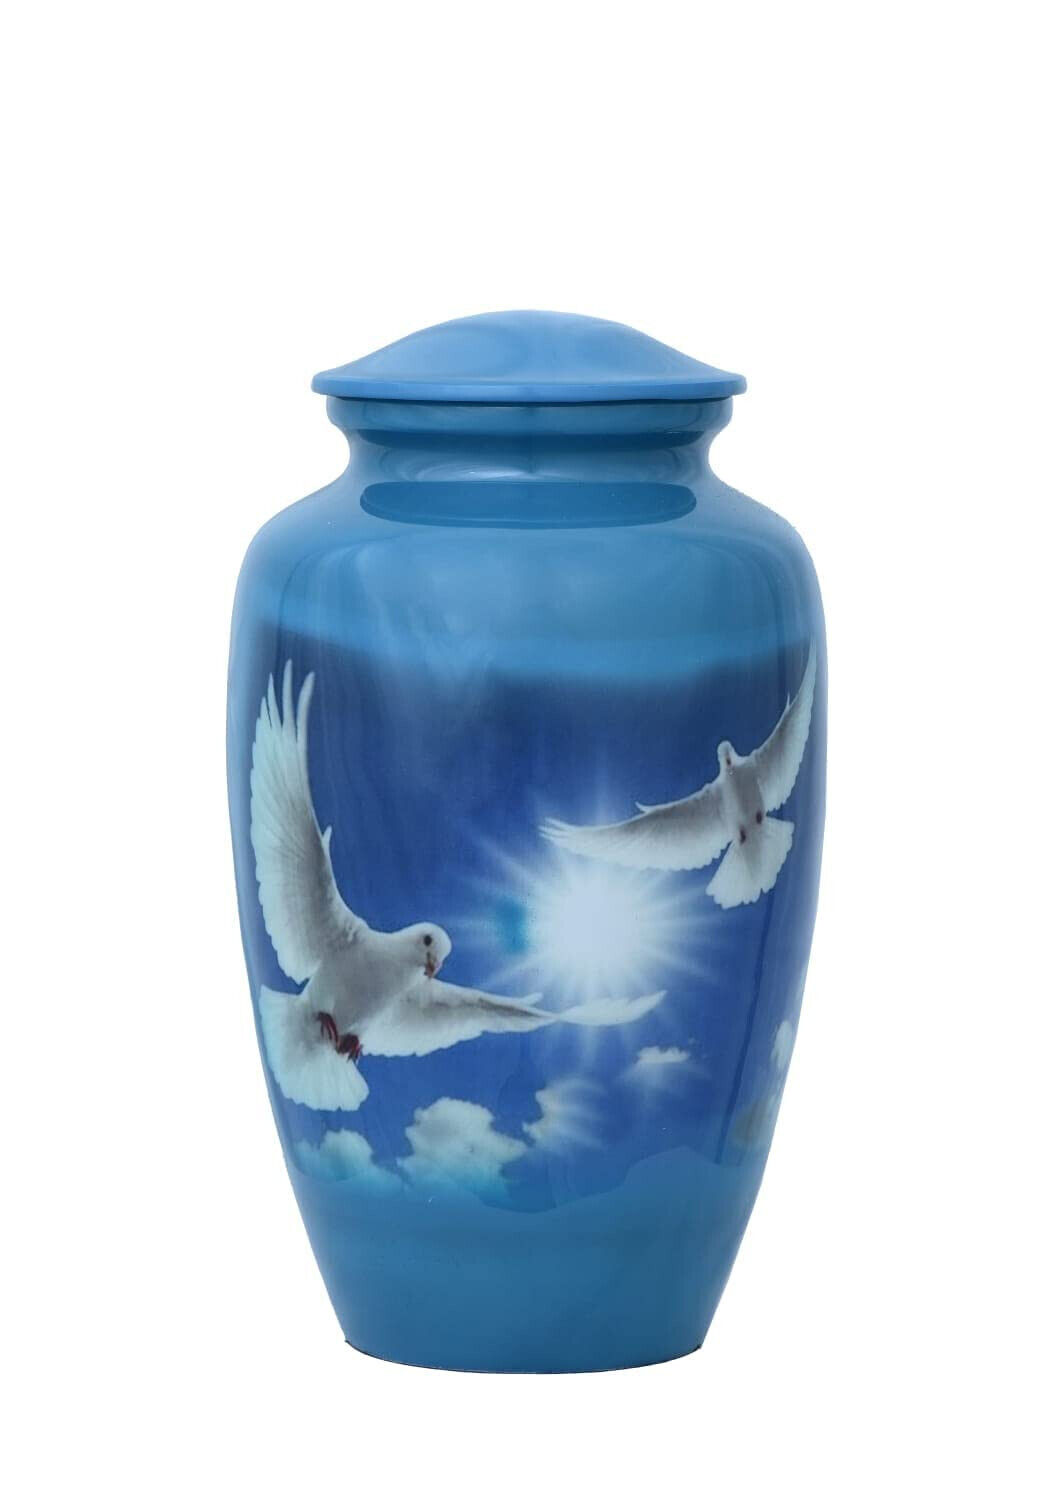 A H Pigeon Fly Handmade Keepsake Urn Memorial Cremation Urn for Human Ashes Sky